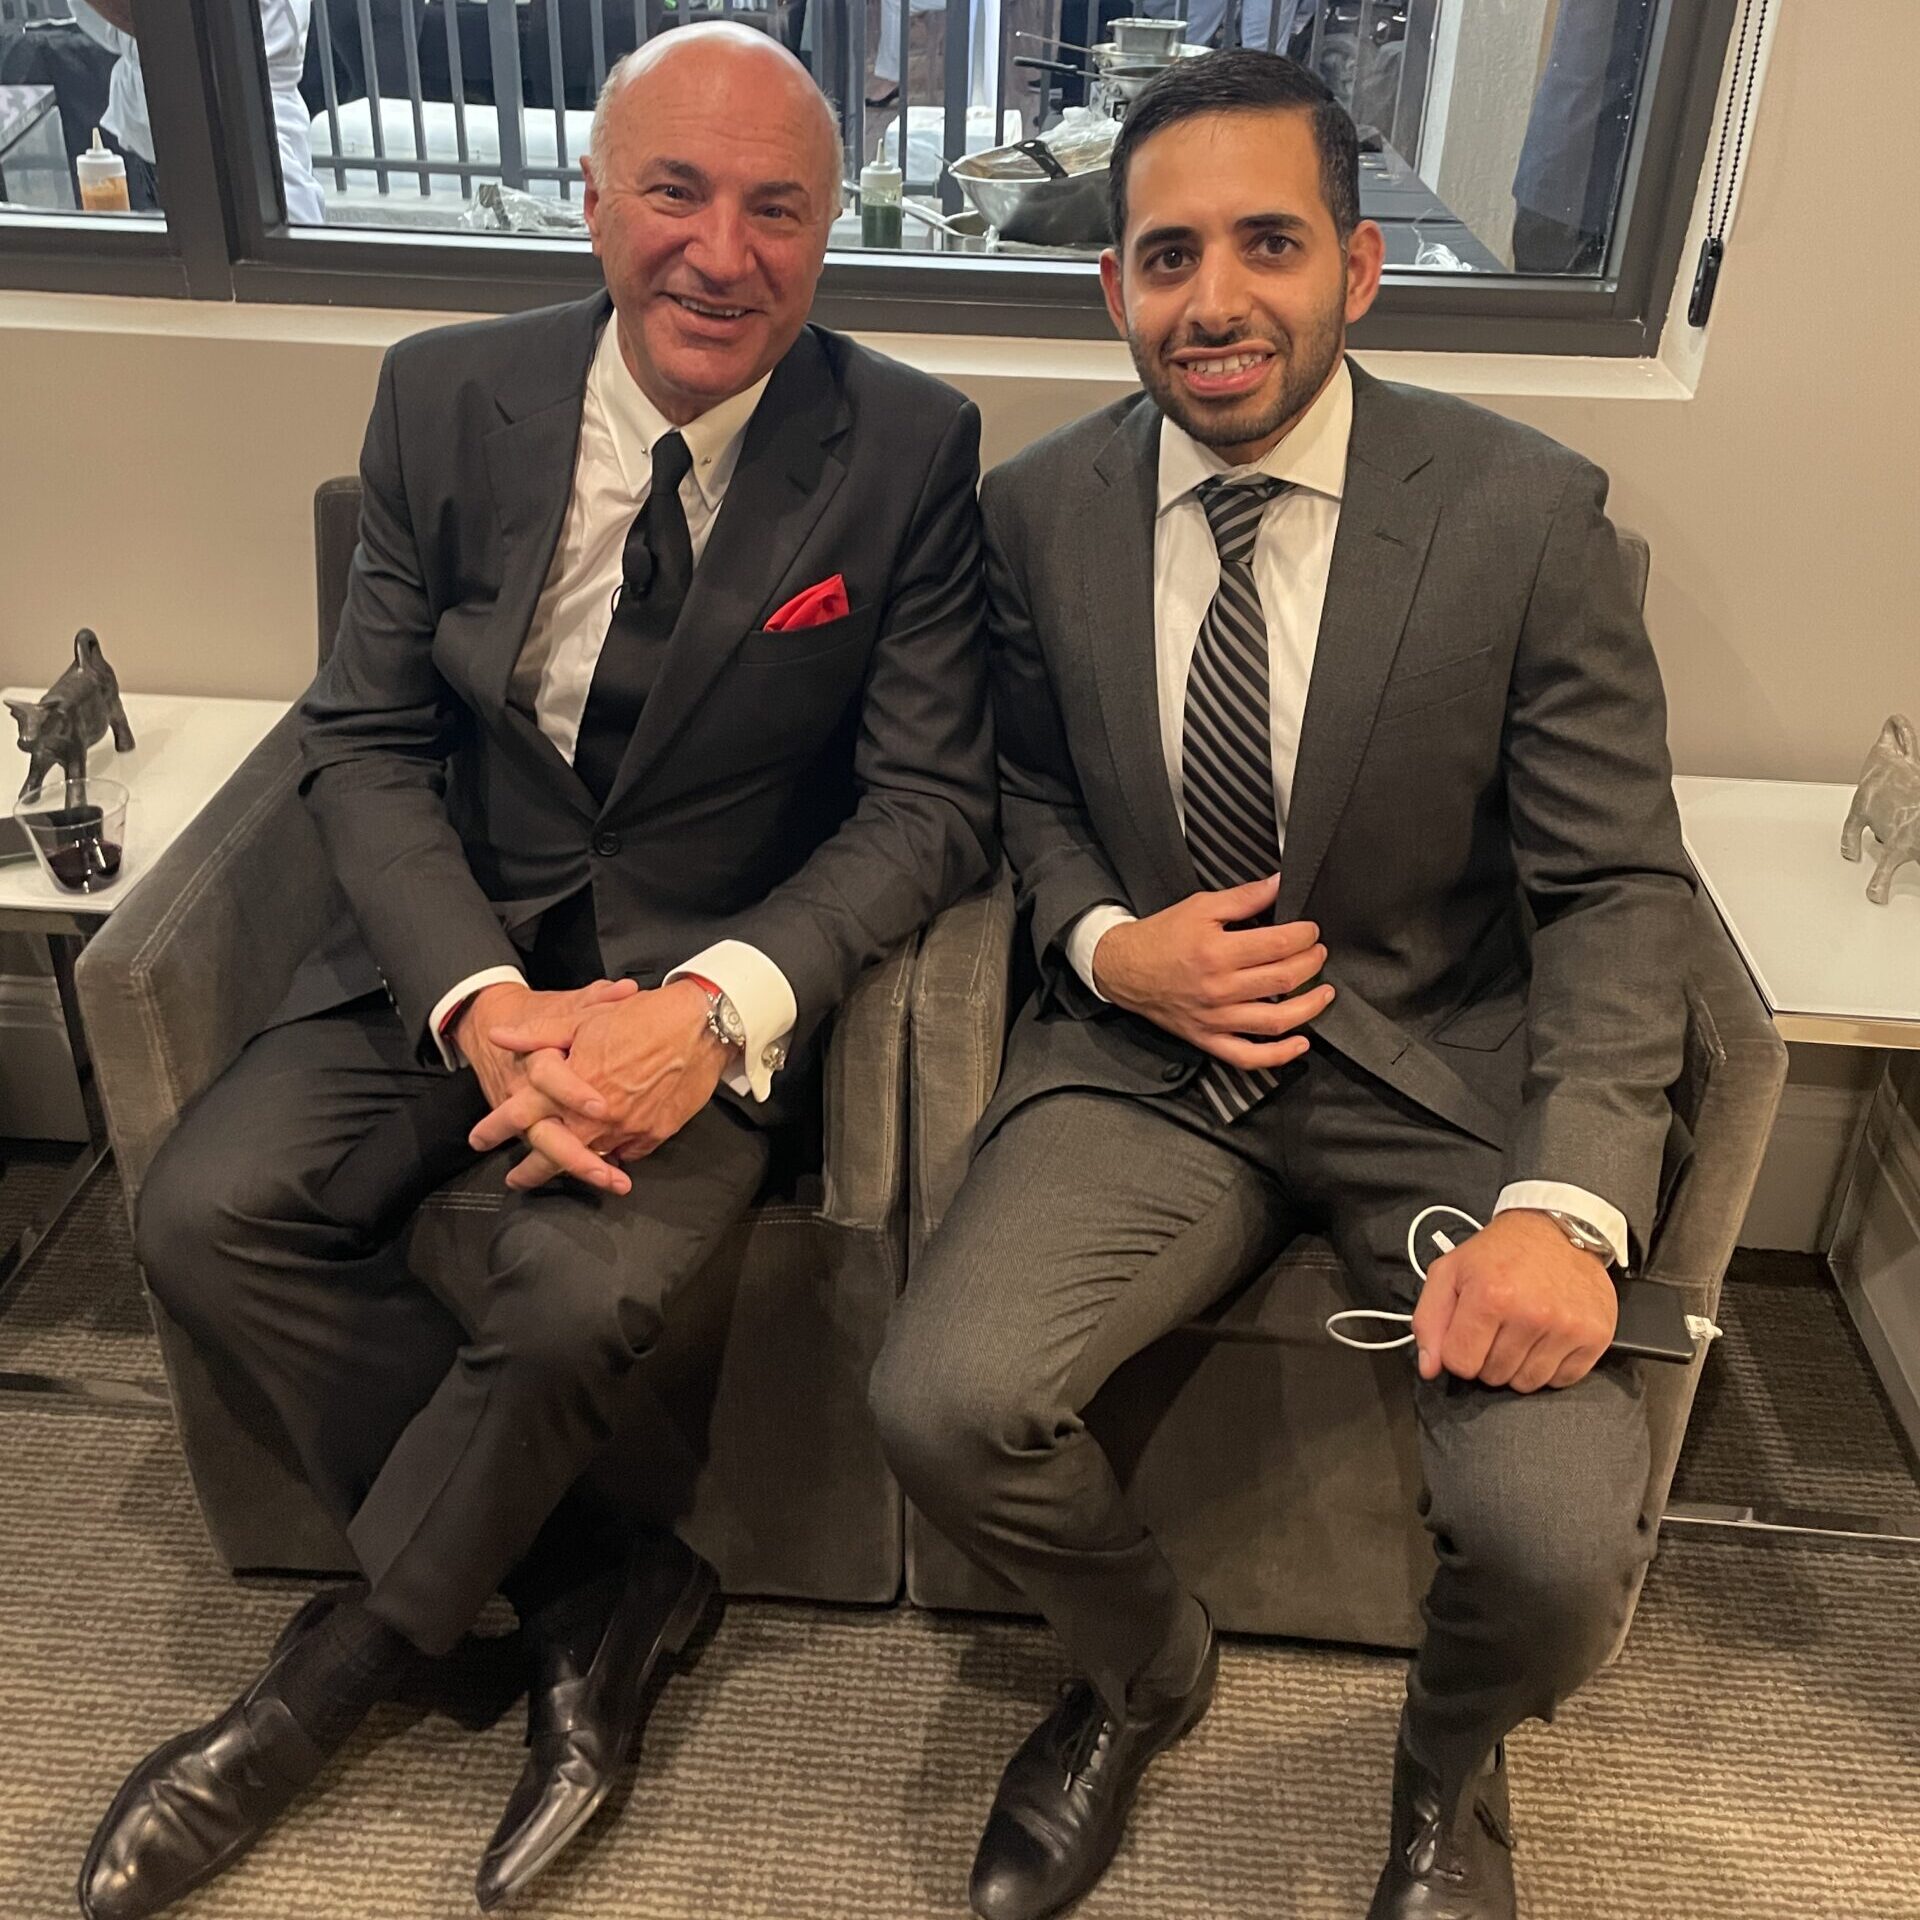 Nicholas Mukhtar hosts event with Shark Tank's Kevin O'Leary.